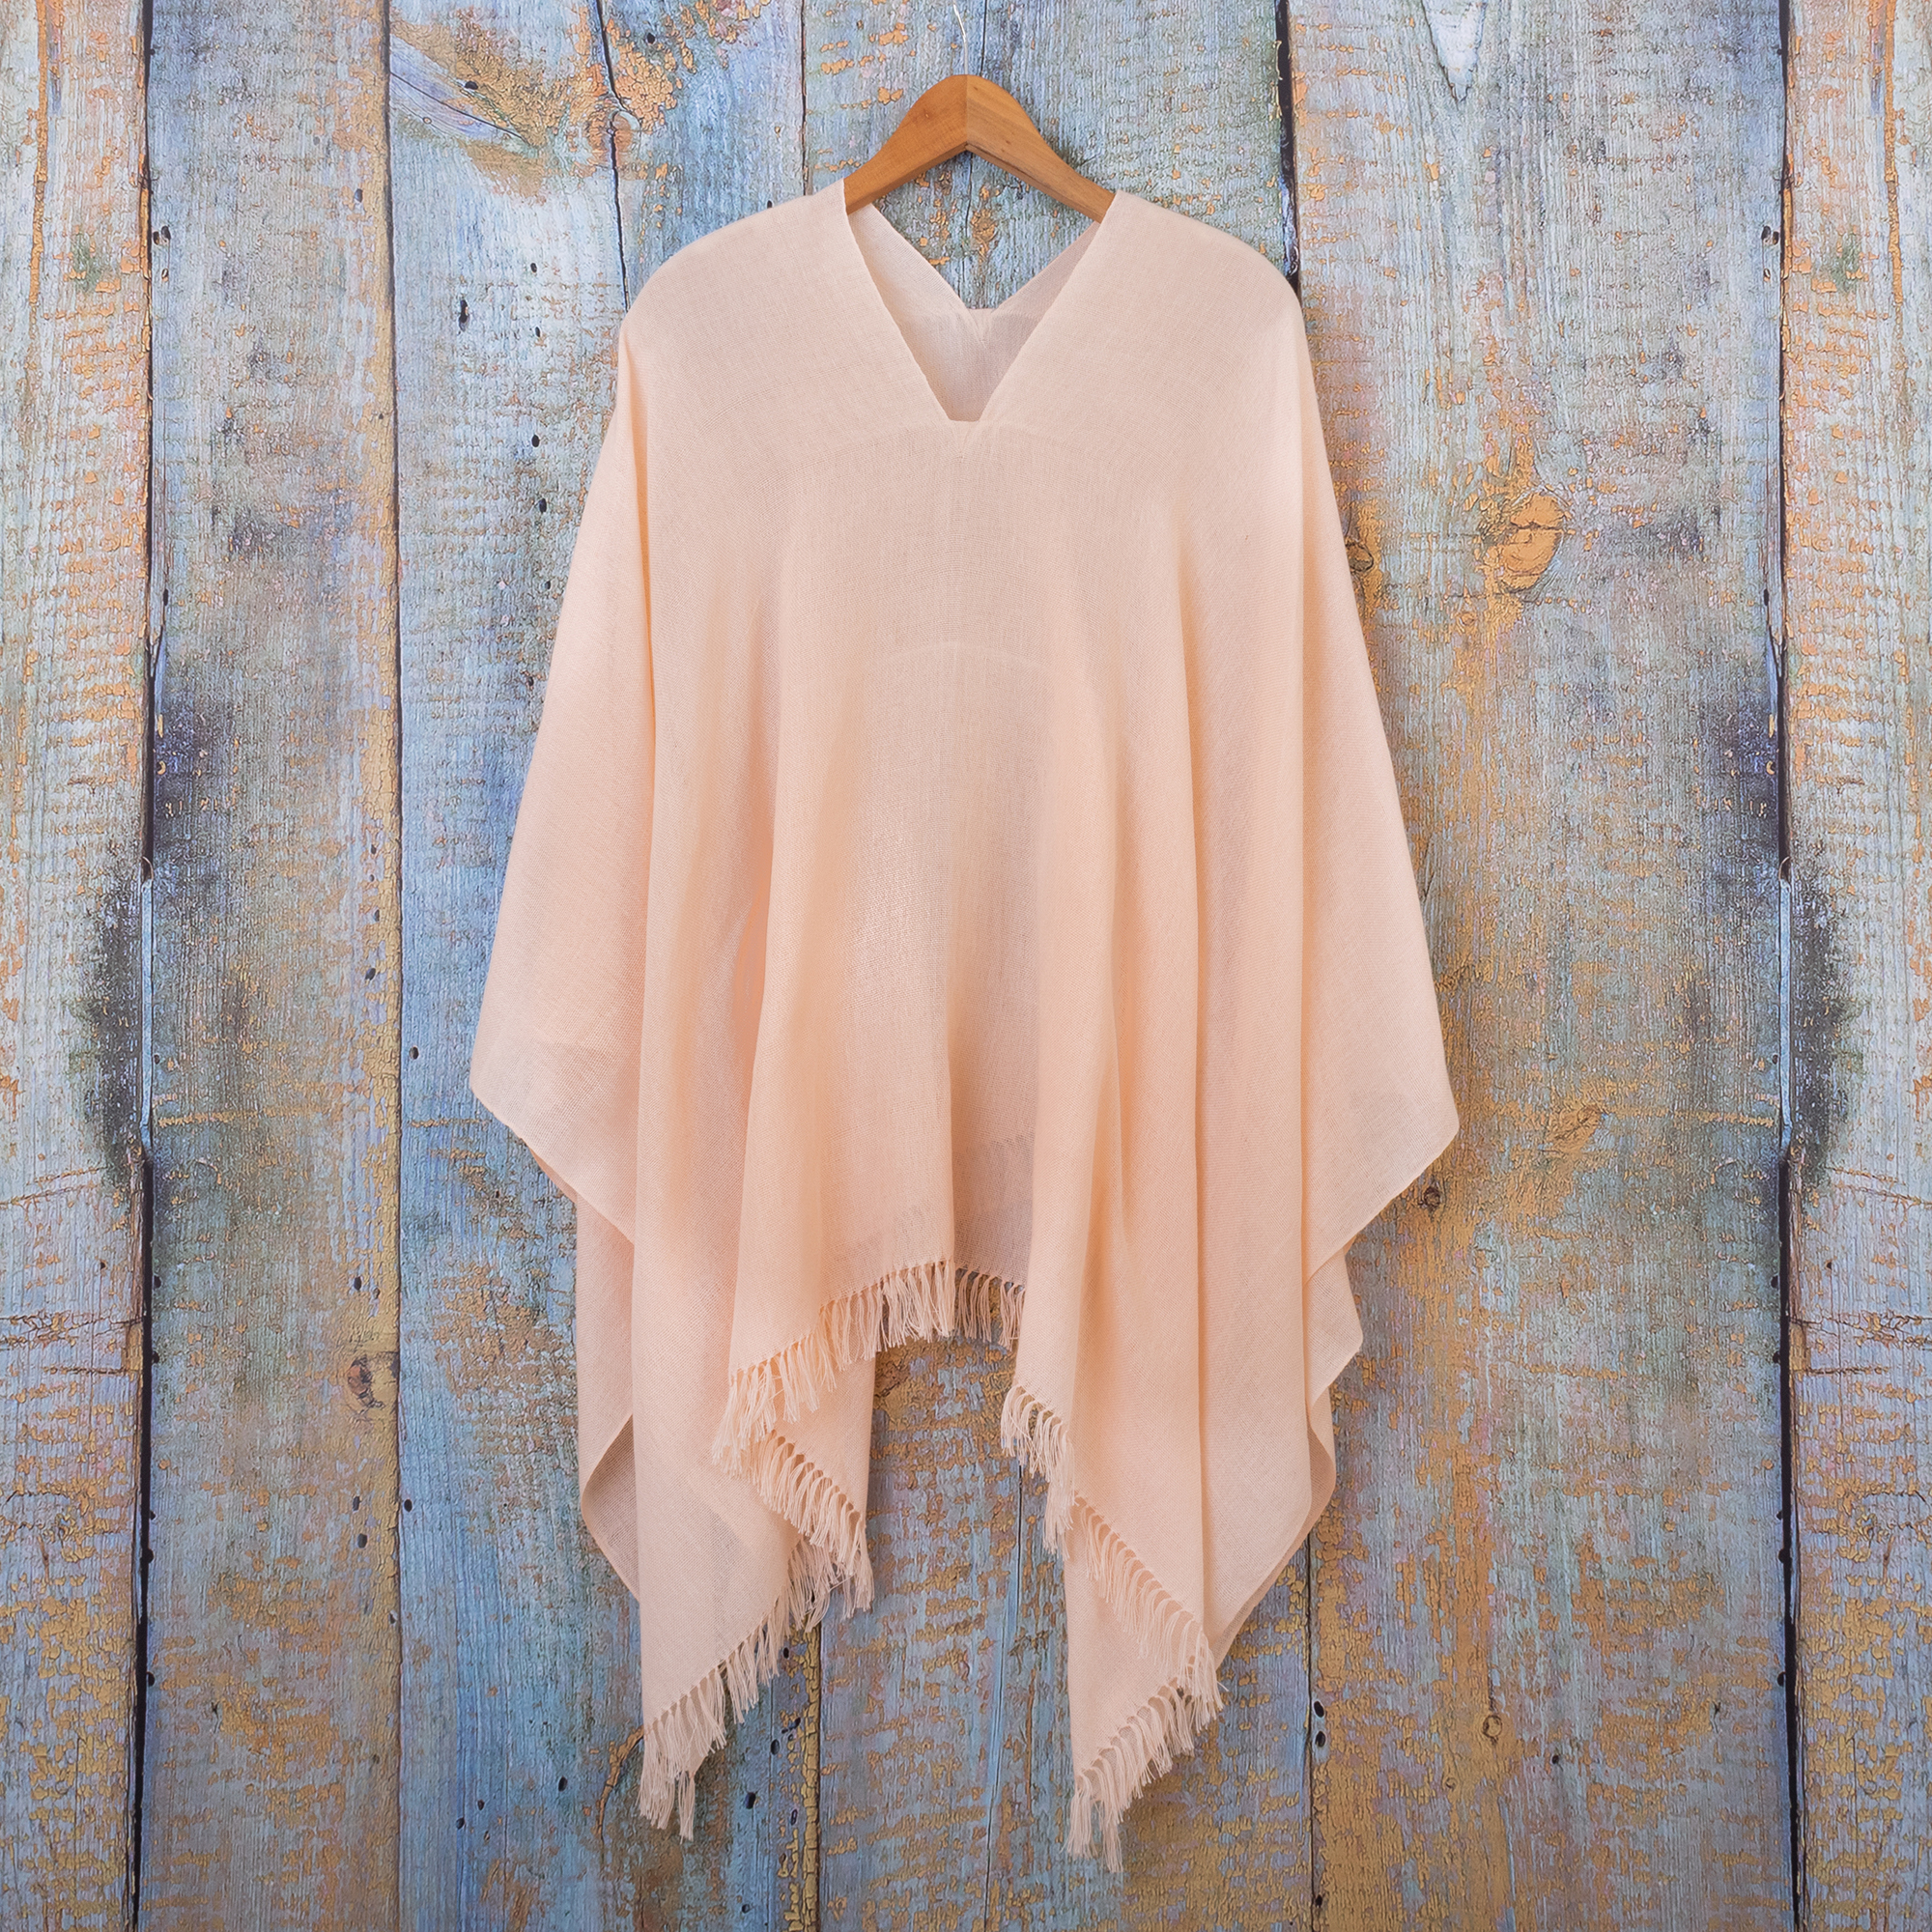 bekymring hellig rekruttere Cotton Pale Peach Handwoven Fringed Poncho from Peru - Pink Cream | NOVICA